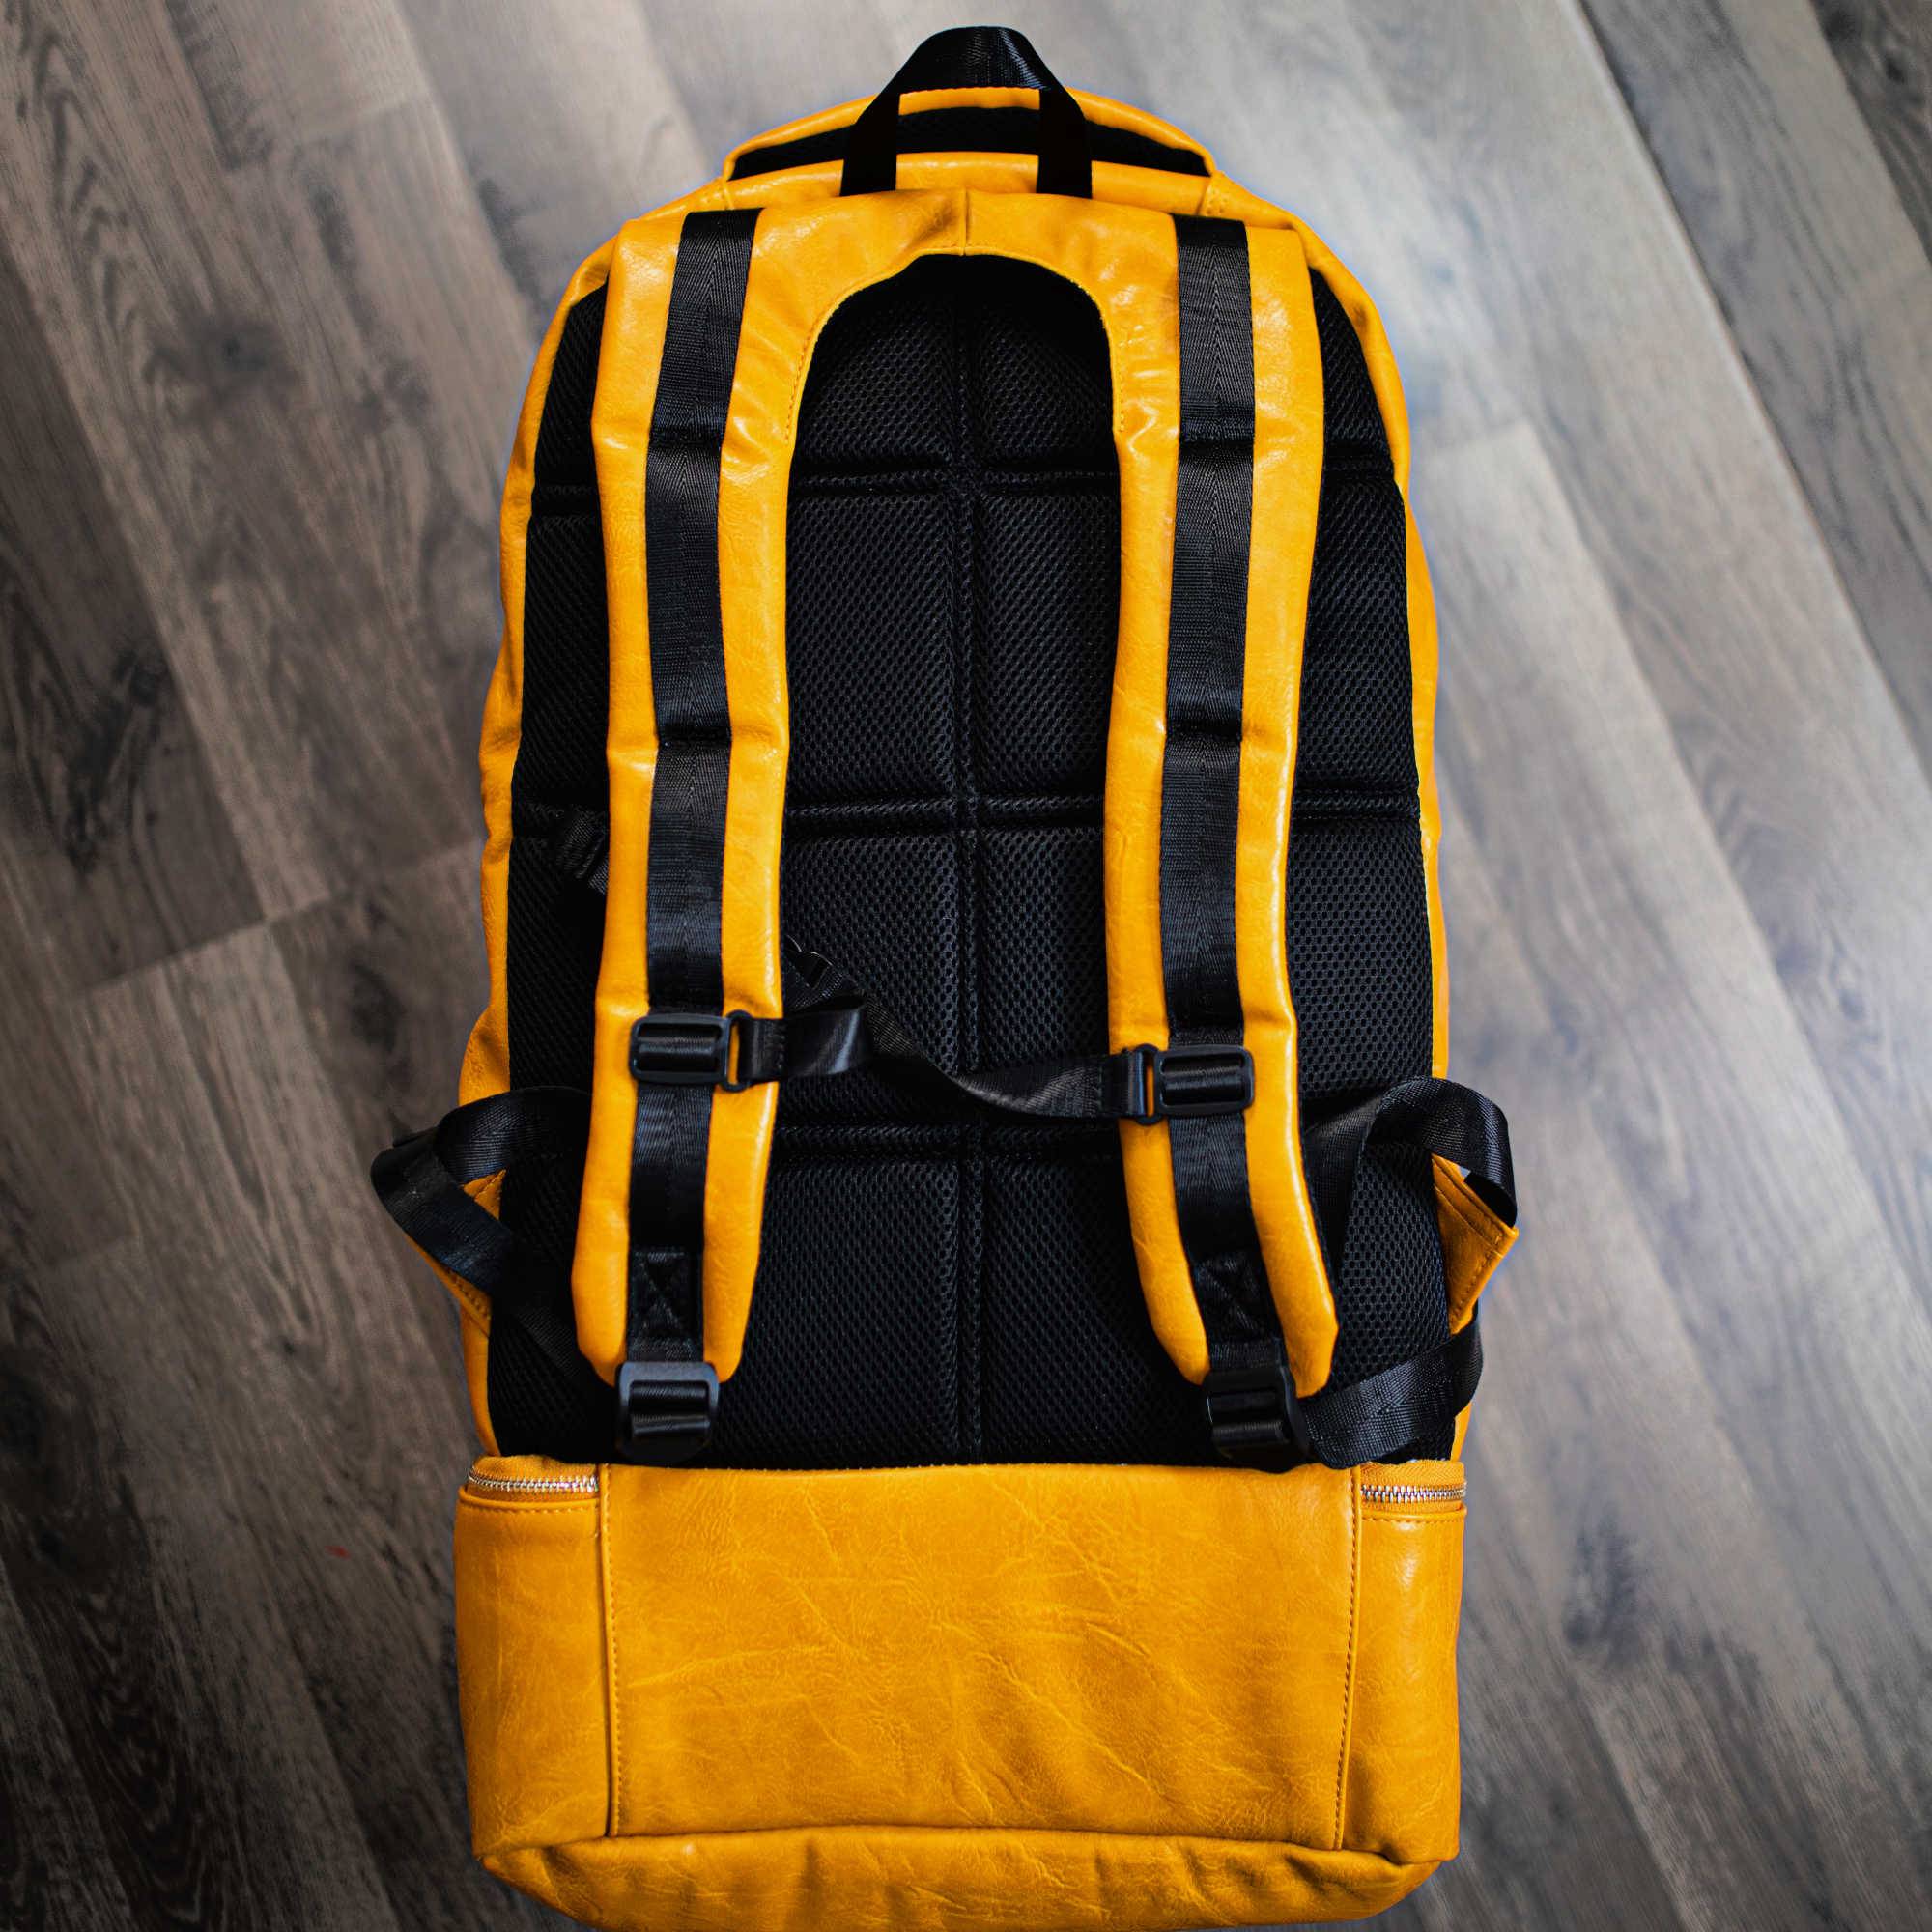 Yellow Luciano Leather Luxury Bag (Brandon Curry Collab) - Sole Premise